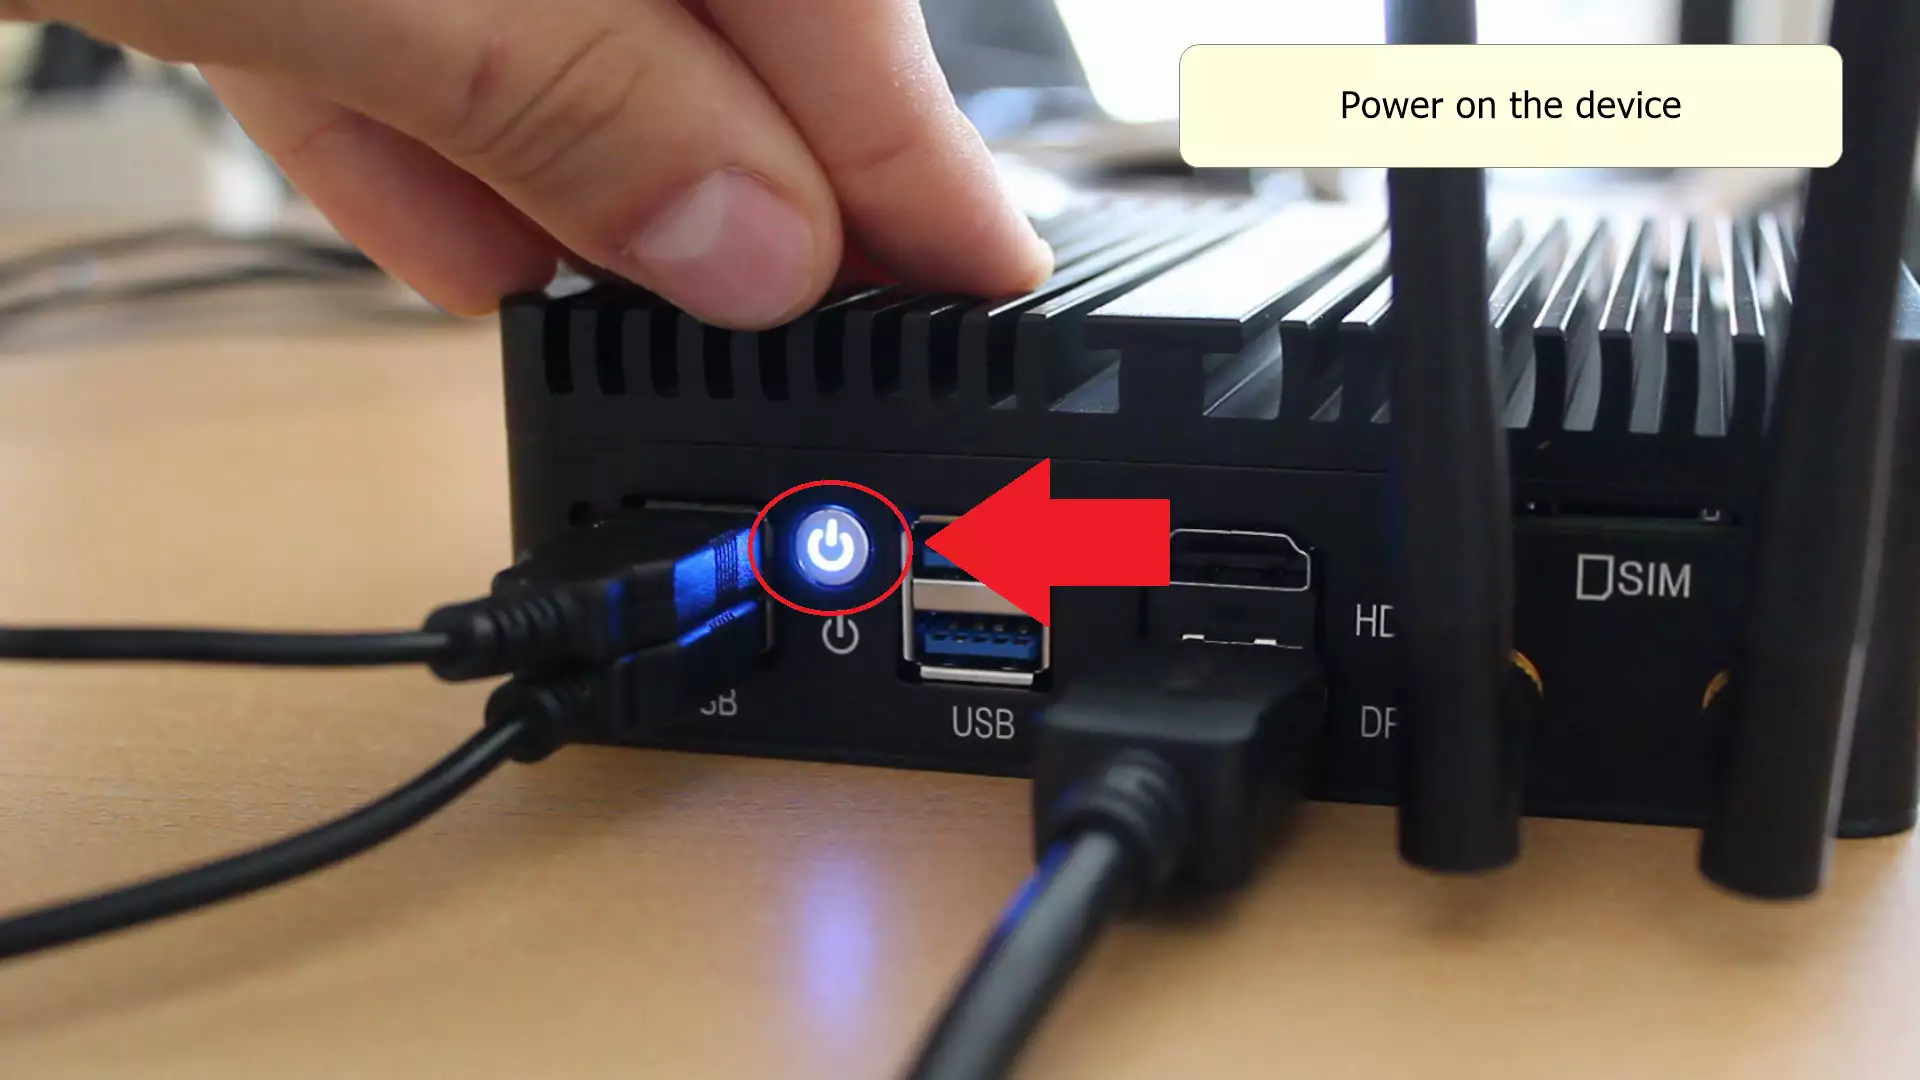 power button between the usb ports